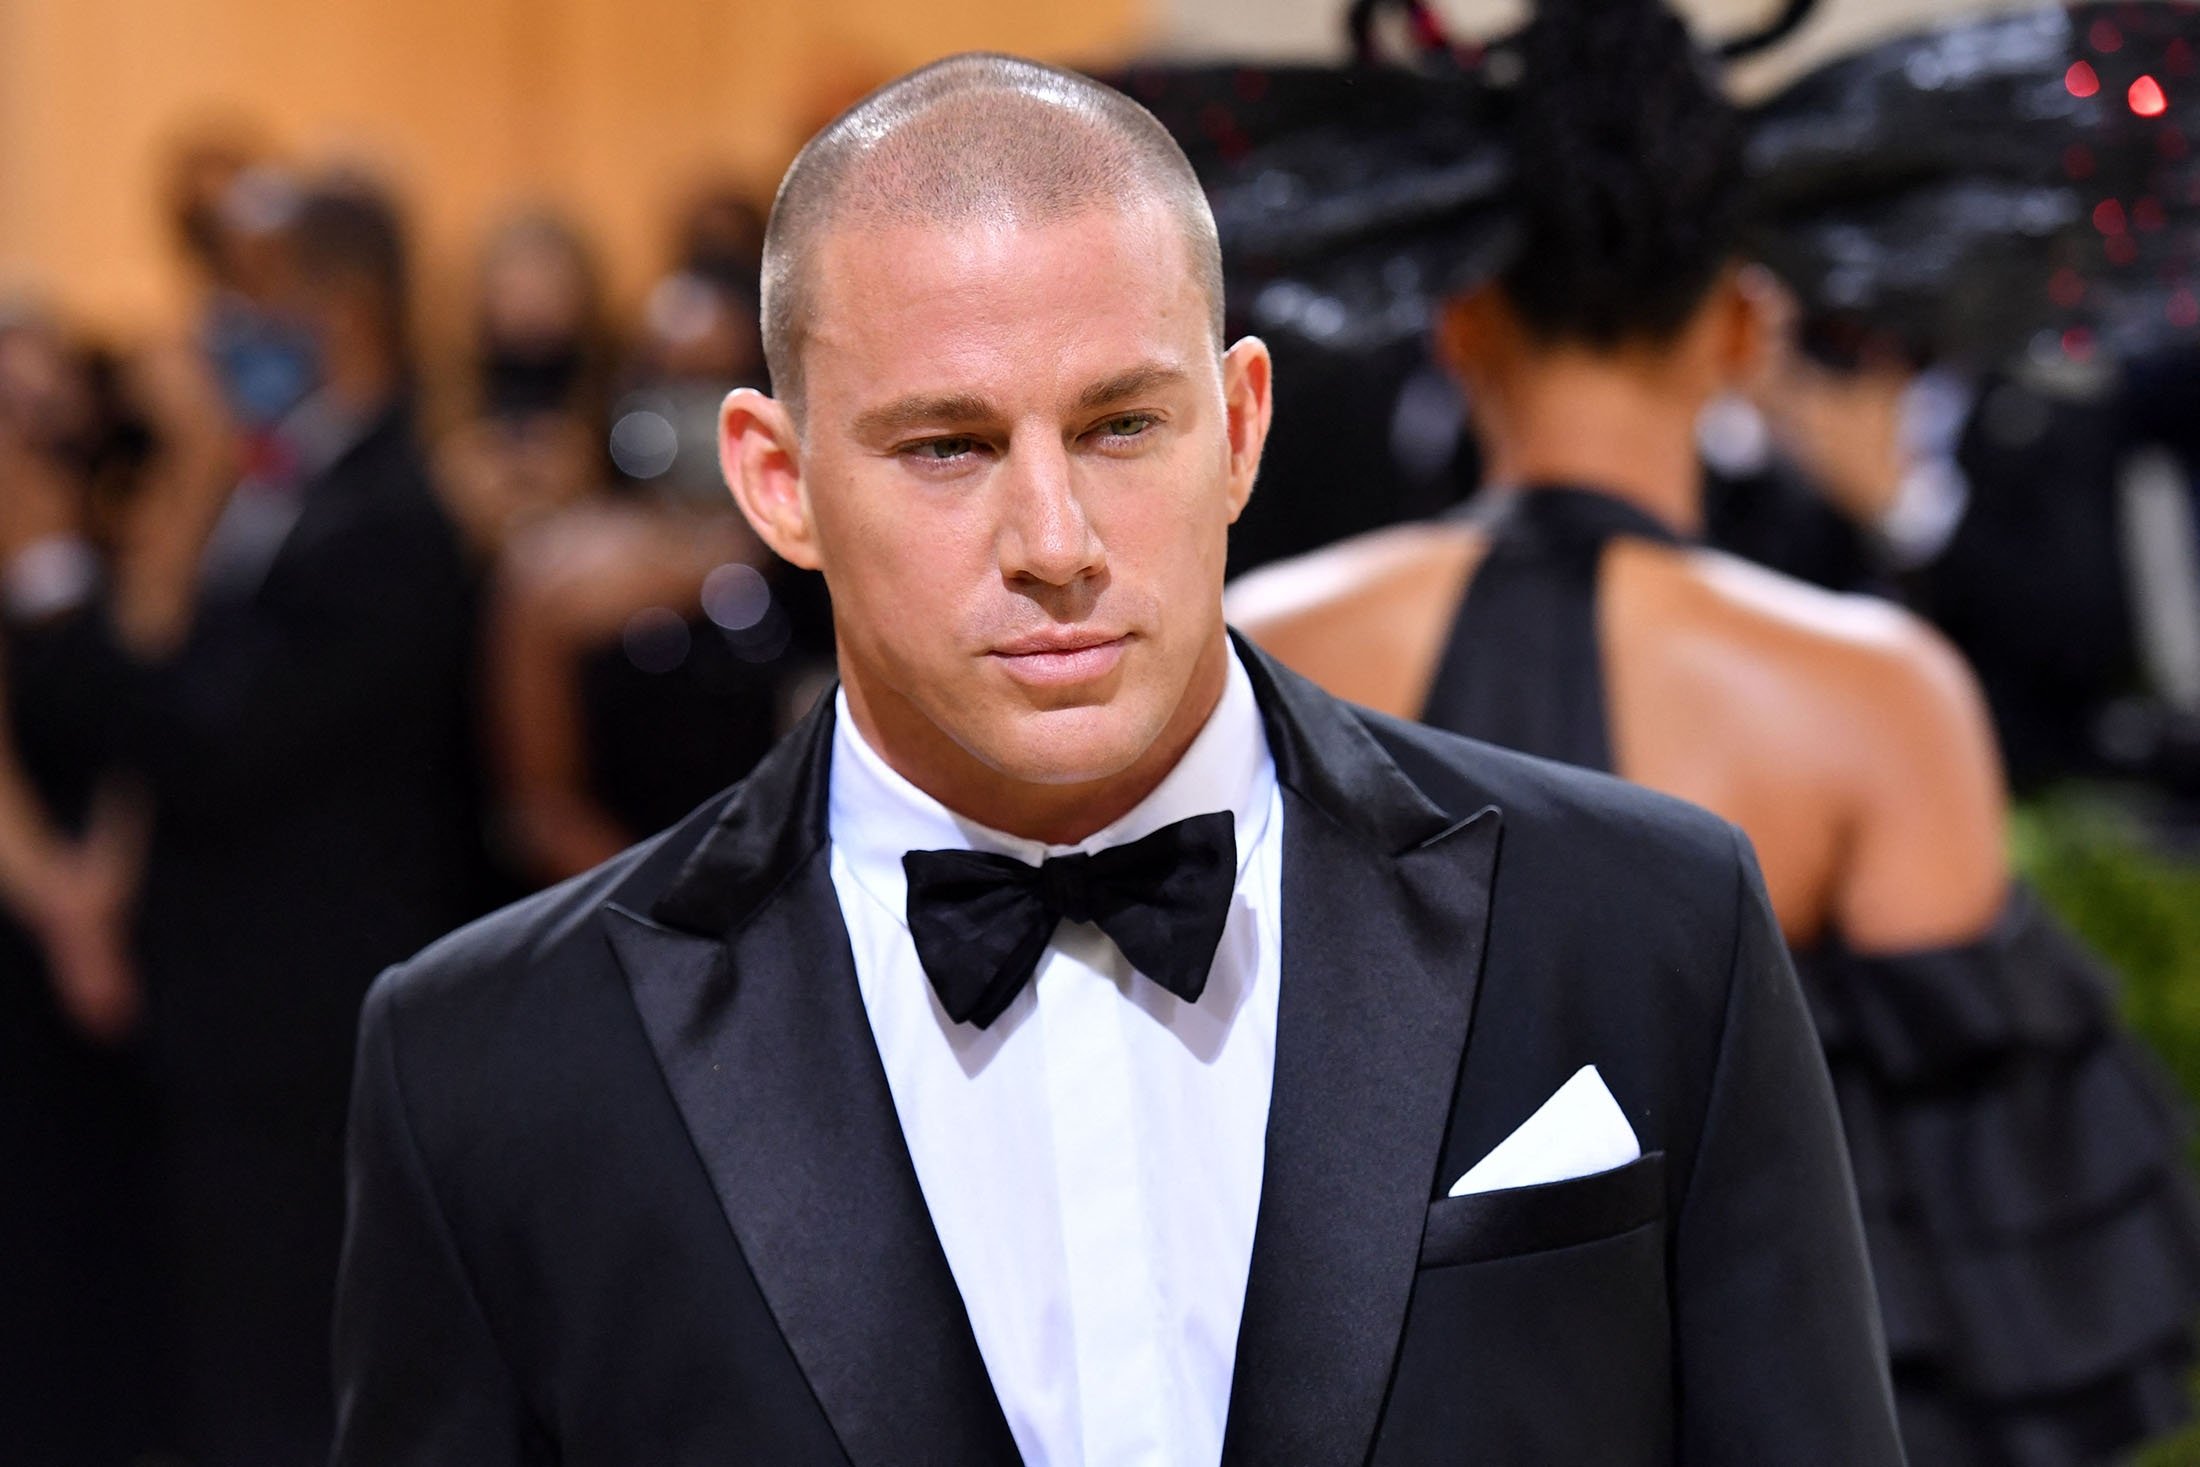 American actor Channing Tatum arrives for the 2021 Met Gala at the Metropolitan Museum of Art, in New York, U.S., Sept. 13, 2021. (AFP Photo)